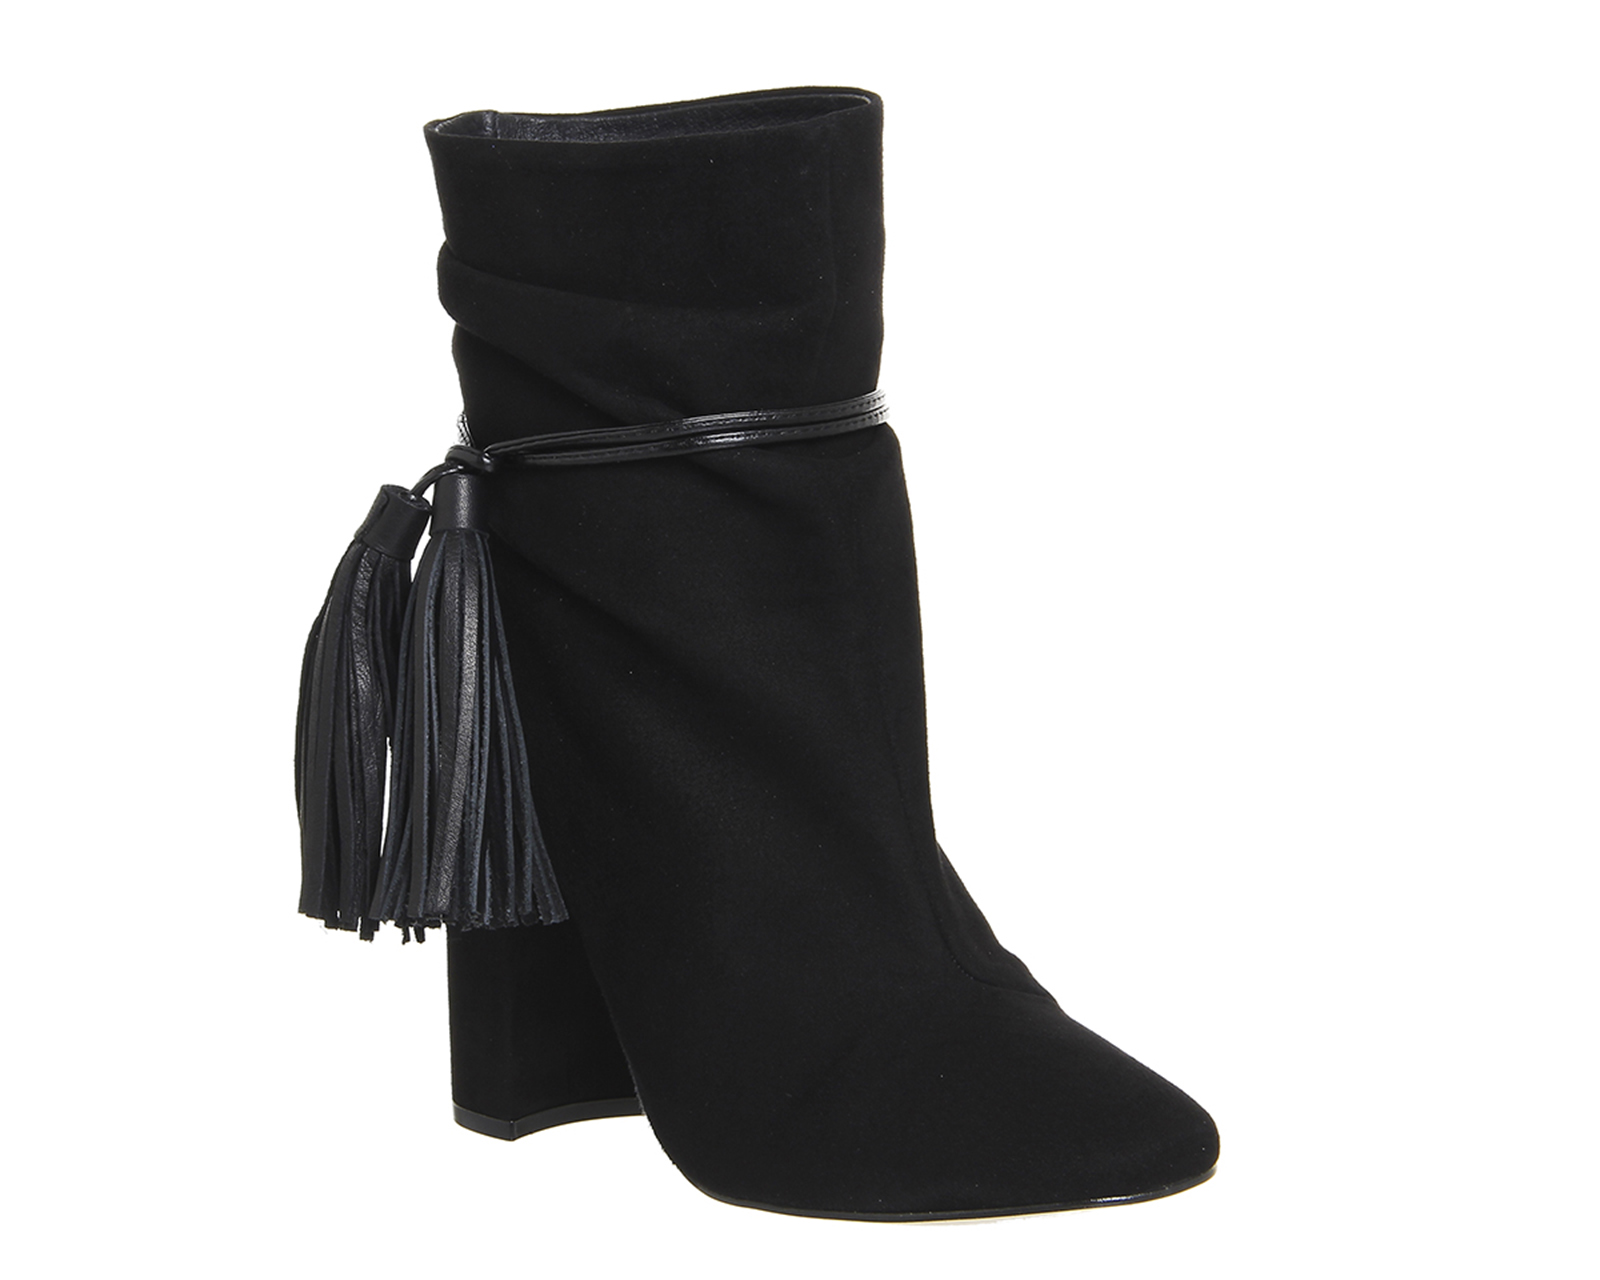 OFFICEInfamous Slouch BootsBlack Suede Black Leather